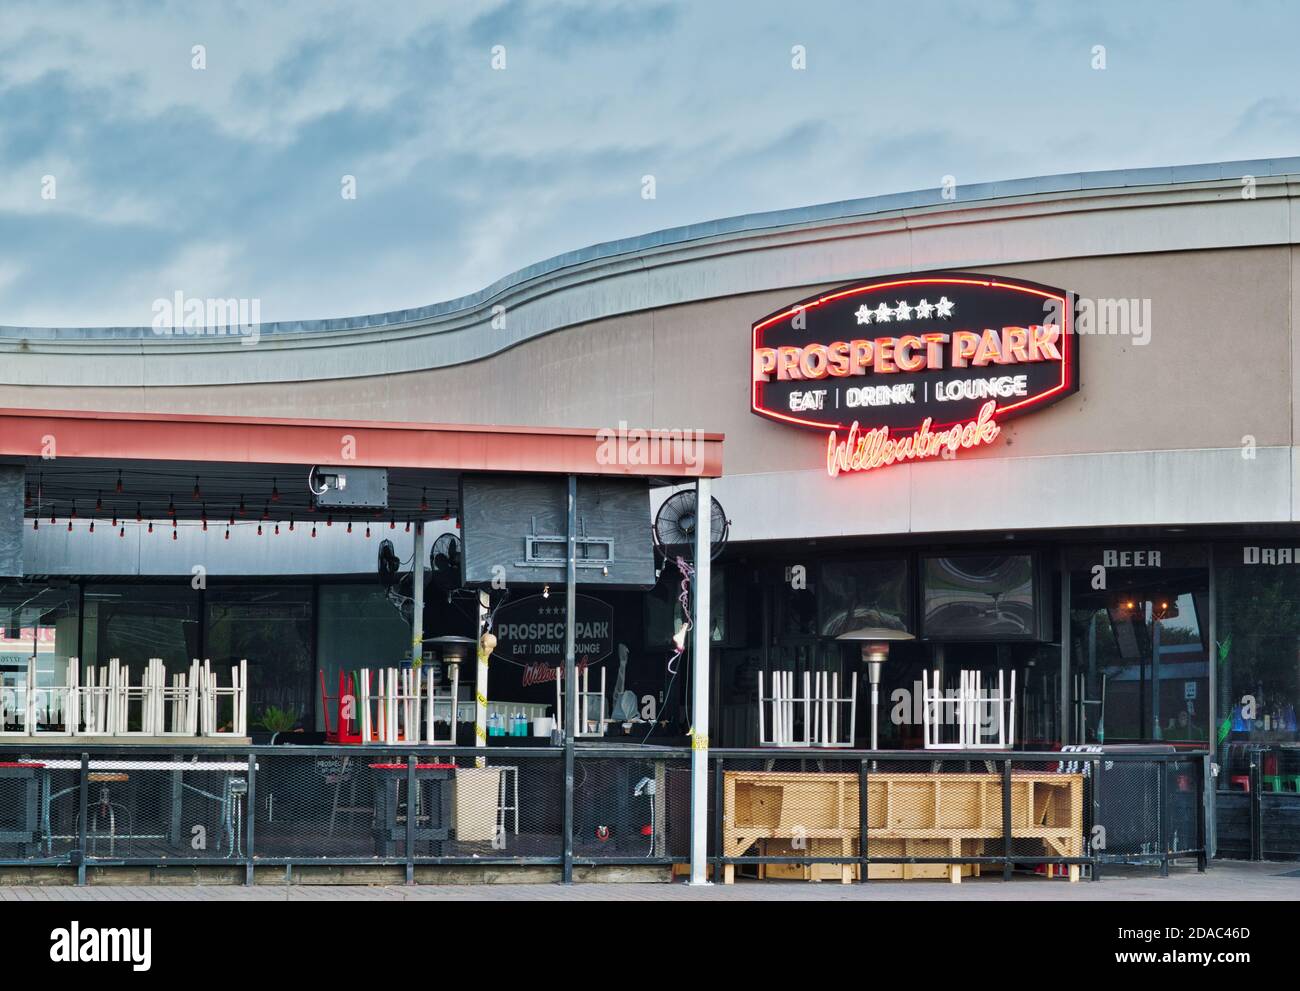 Houston, Texas/USA 10/23/2020: Prospect Park restaurant facade in Willowbrook Mall, Houston TX before business hours. Sports lounge business chain. Stock Photo